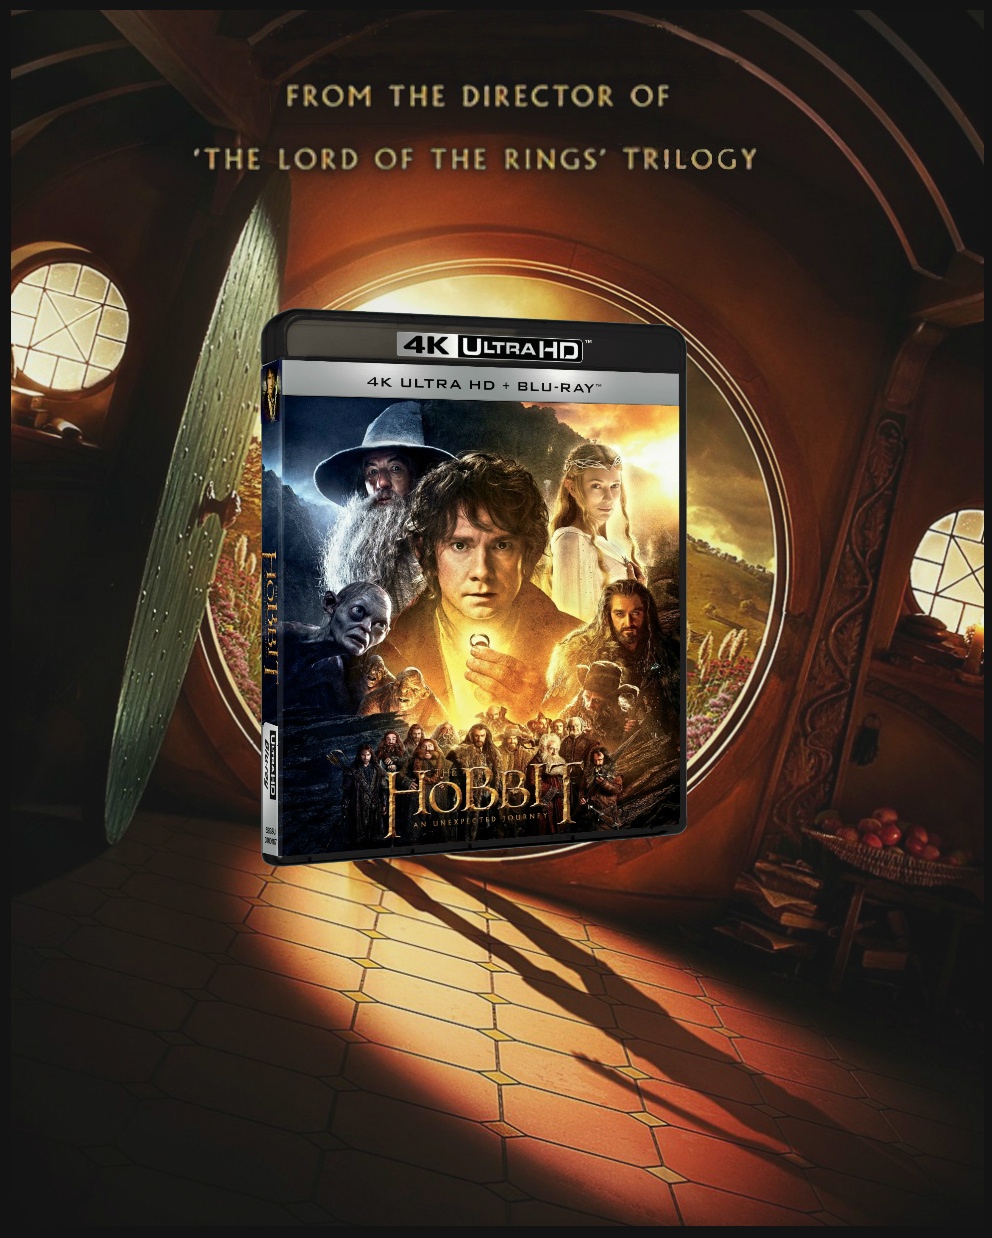 The Hobbit: An Unexpected Journey download the new version for ios